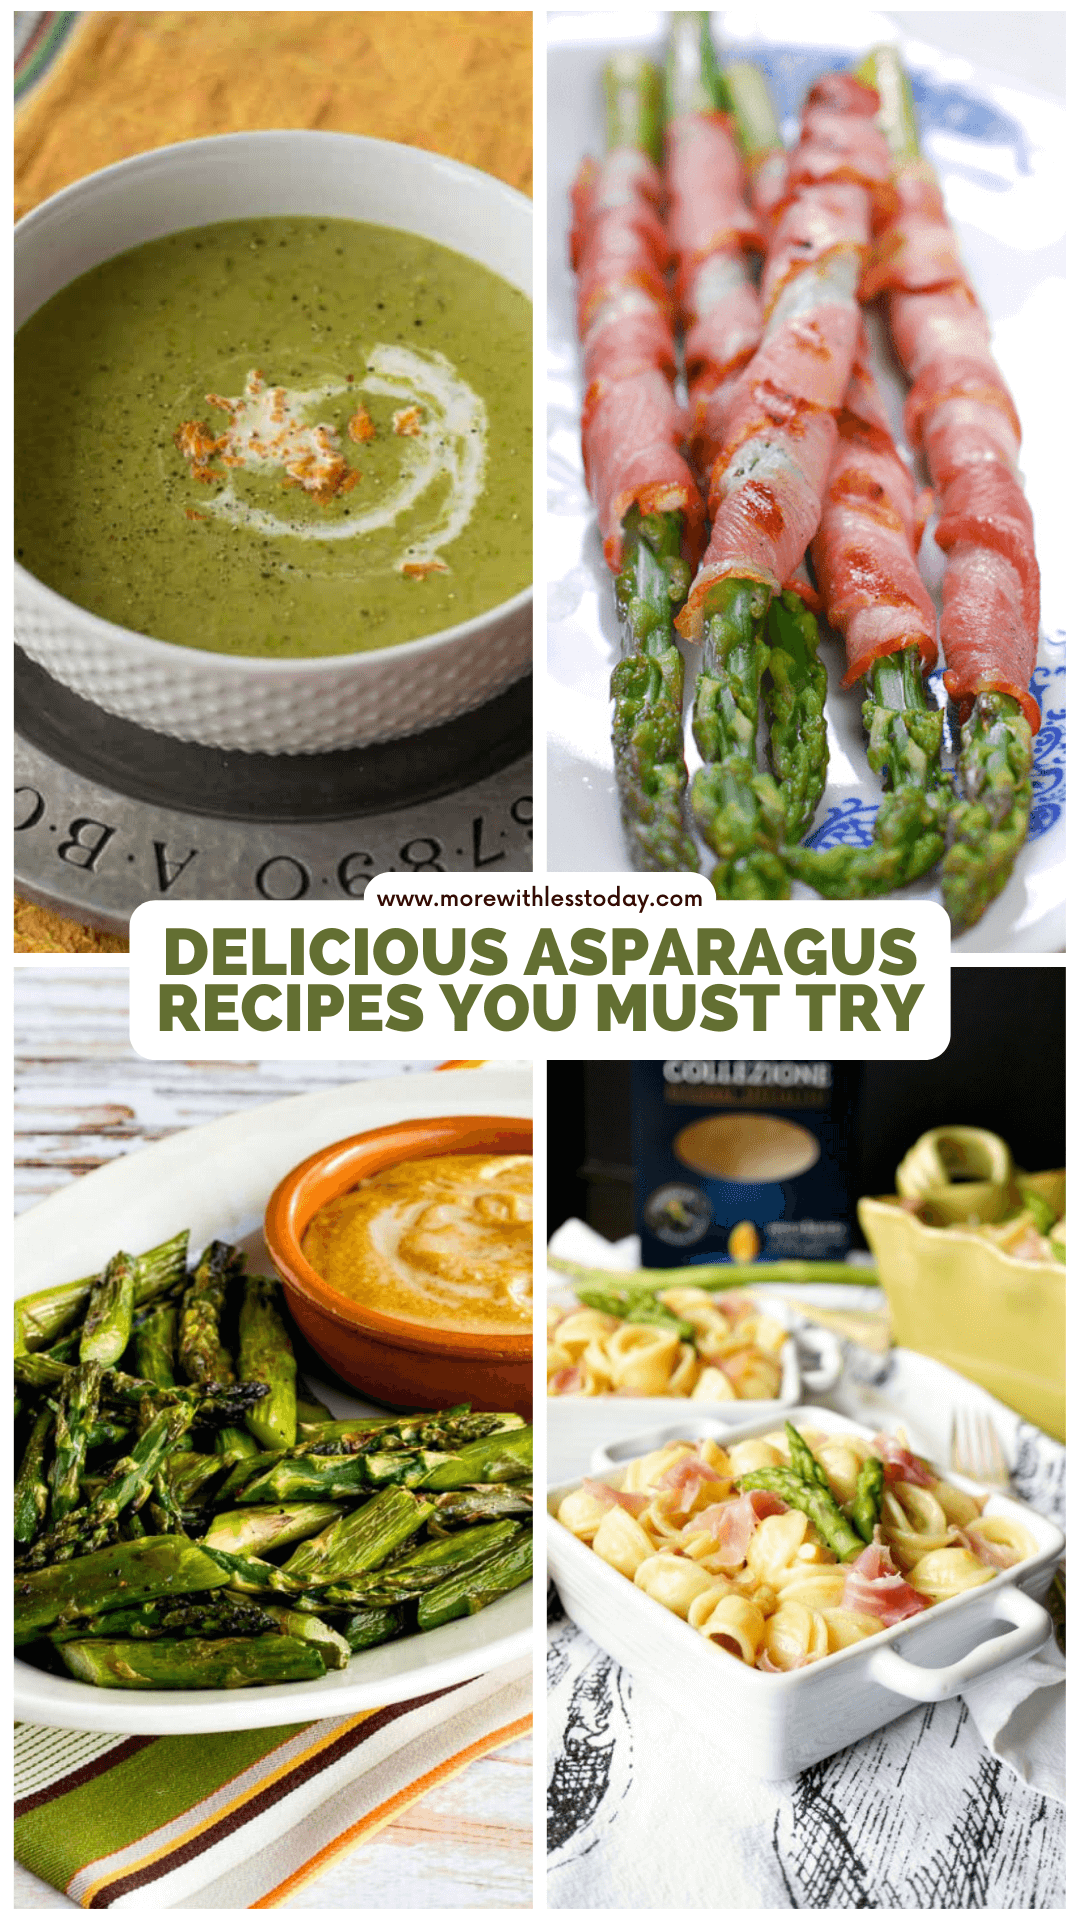 Delicious Asparagus Recipes You Must Try - PIN